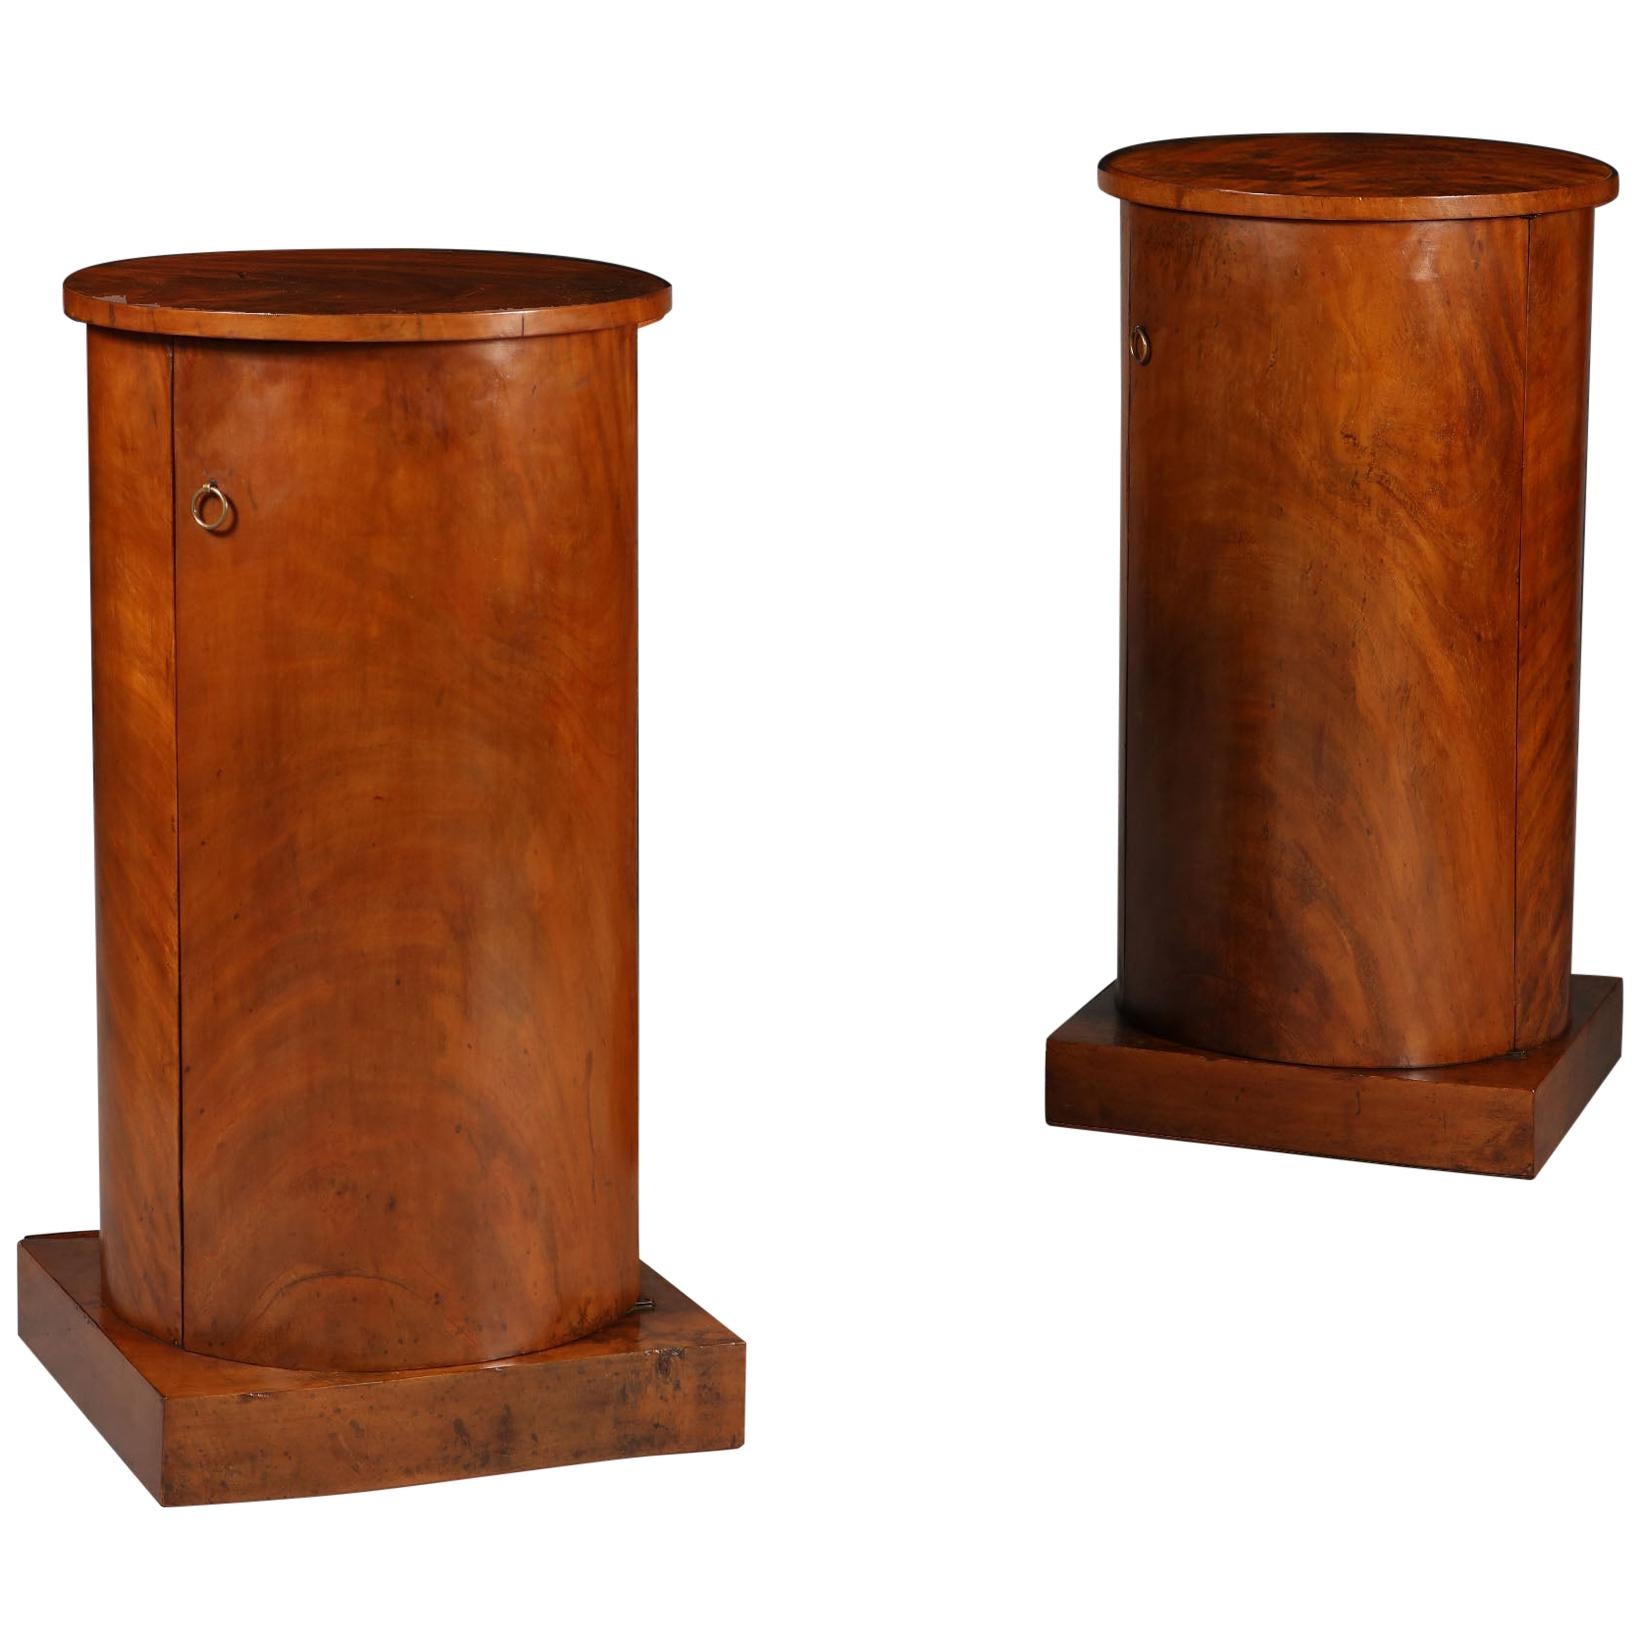 Pair of 19th Century Brown Flame Mahogany Wood Bedside Pedestal Tables/Cupboards